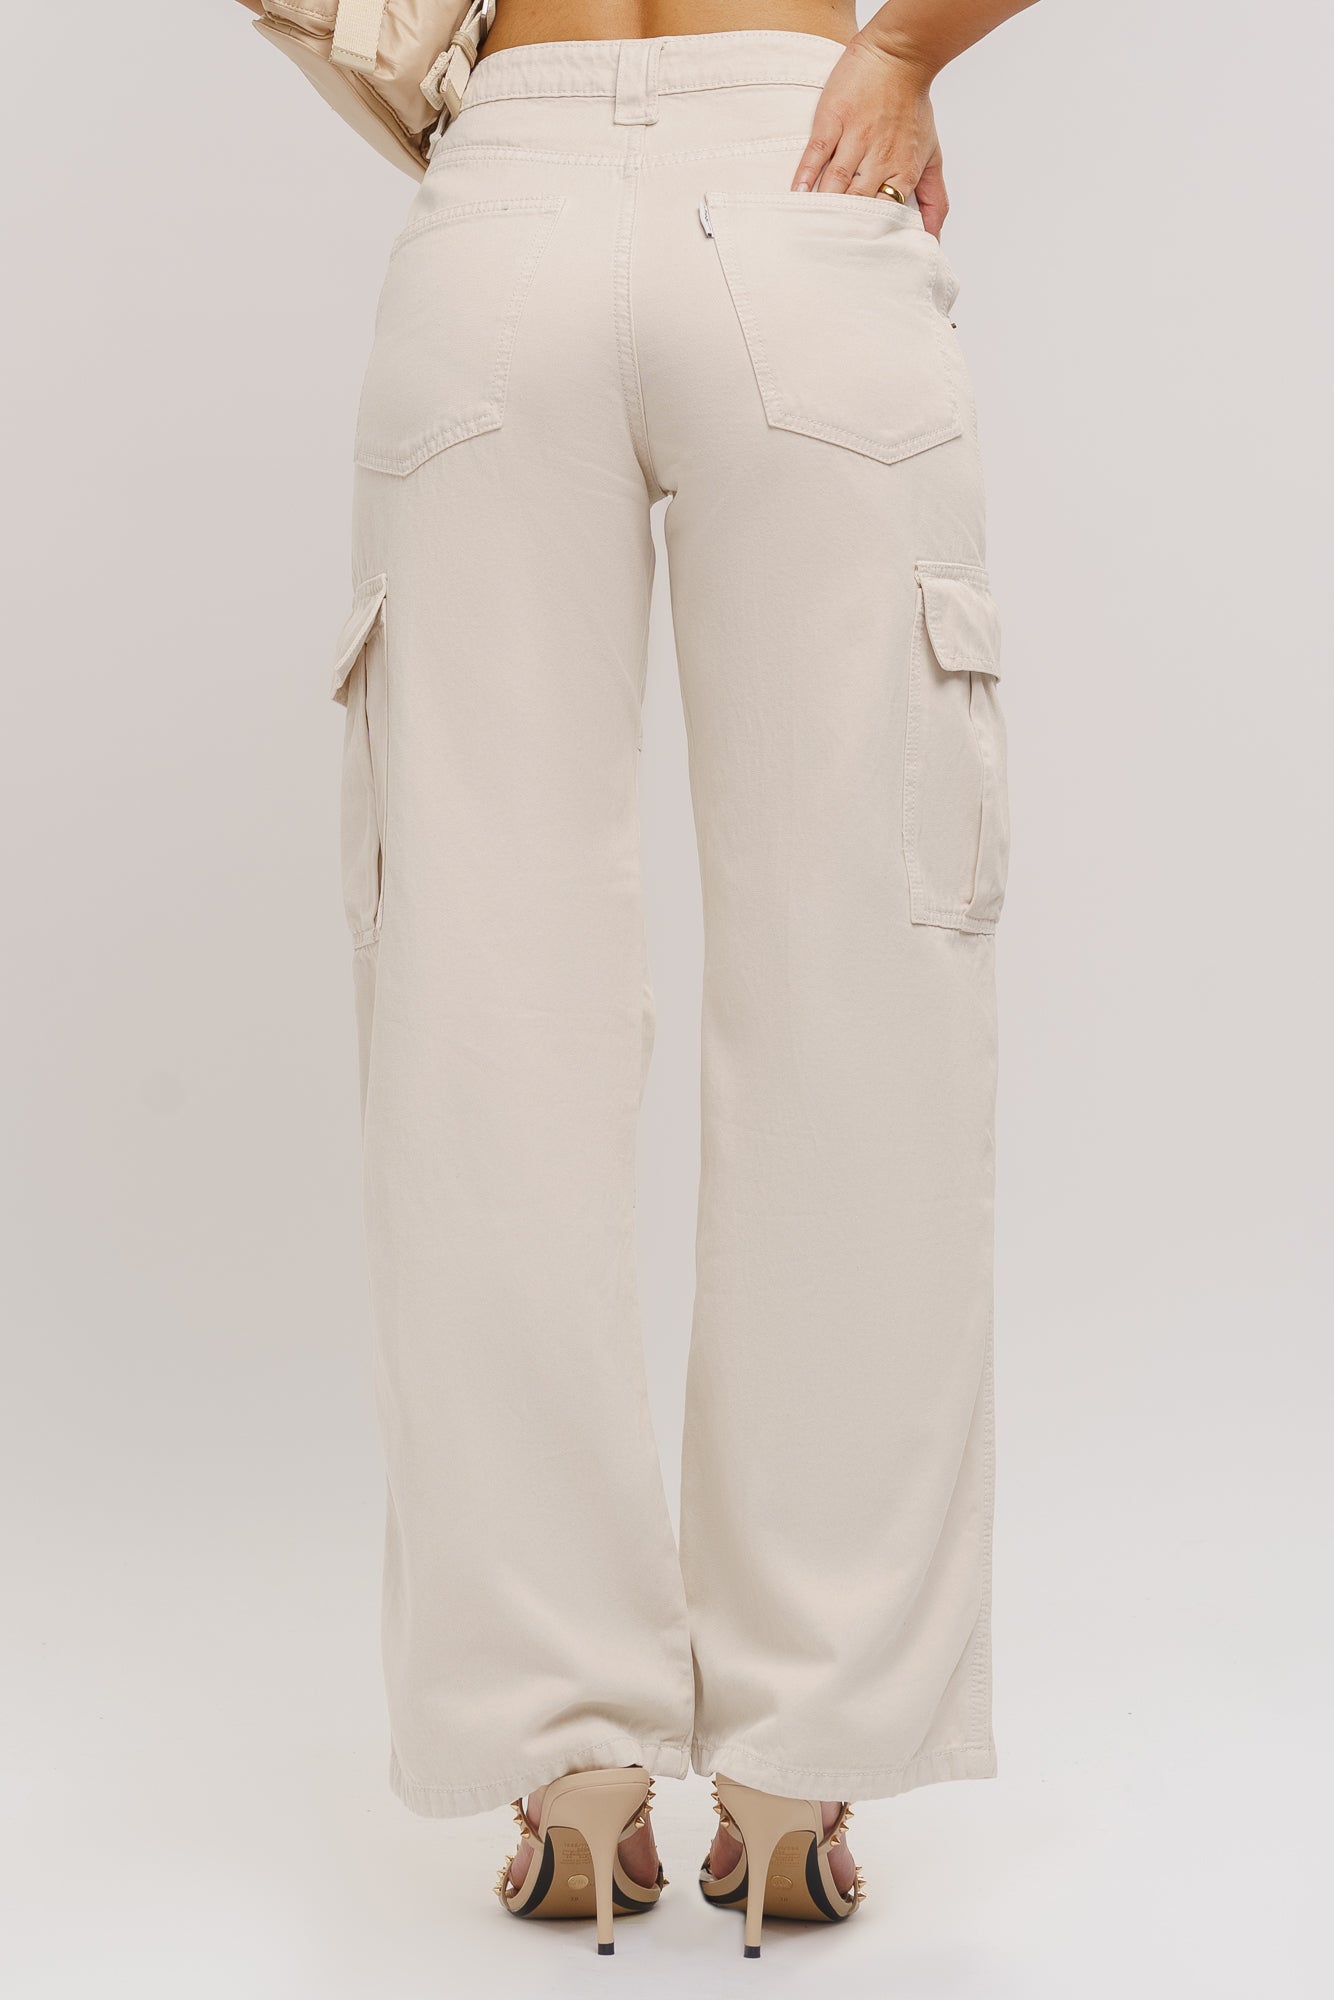 THE ALL NEW CLASSIC WIDE LEG 6 POCKET BEIGE CARGO JEANS FOR WOMENS